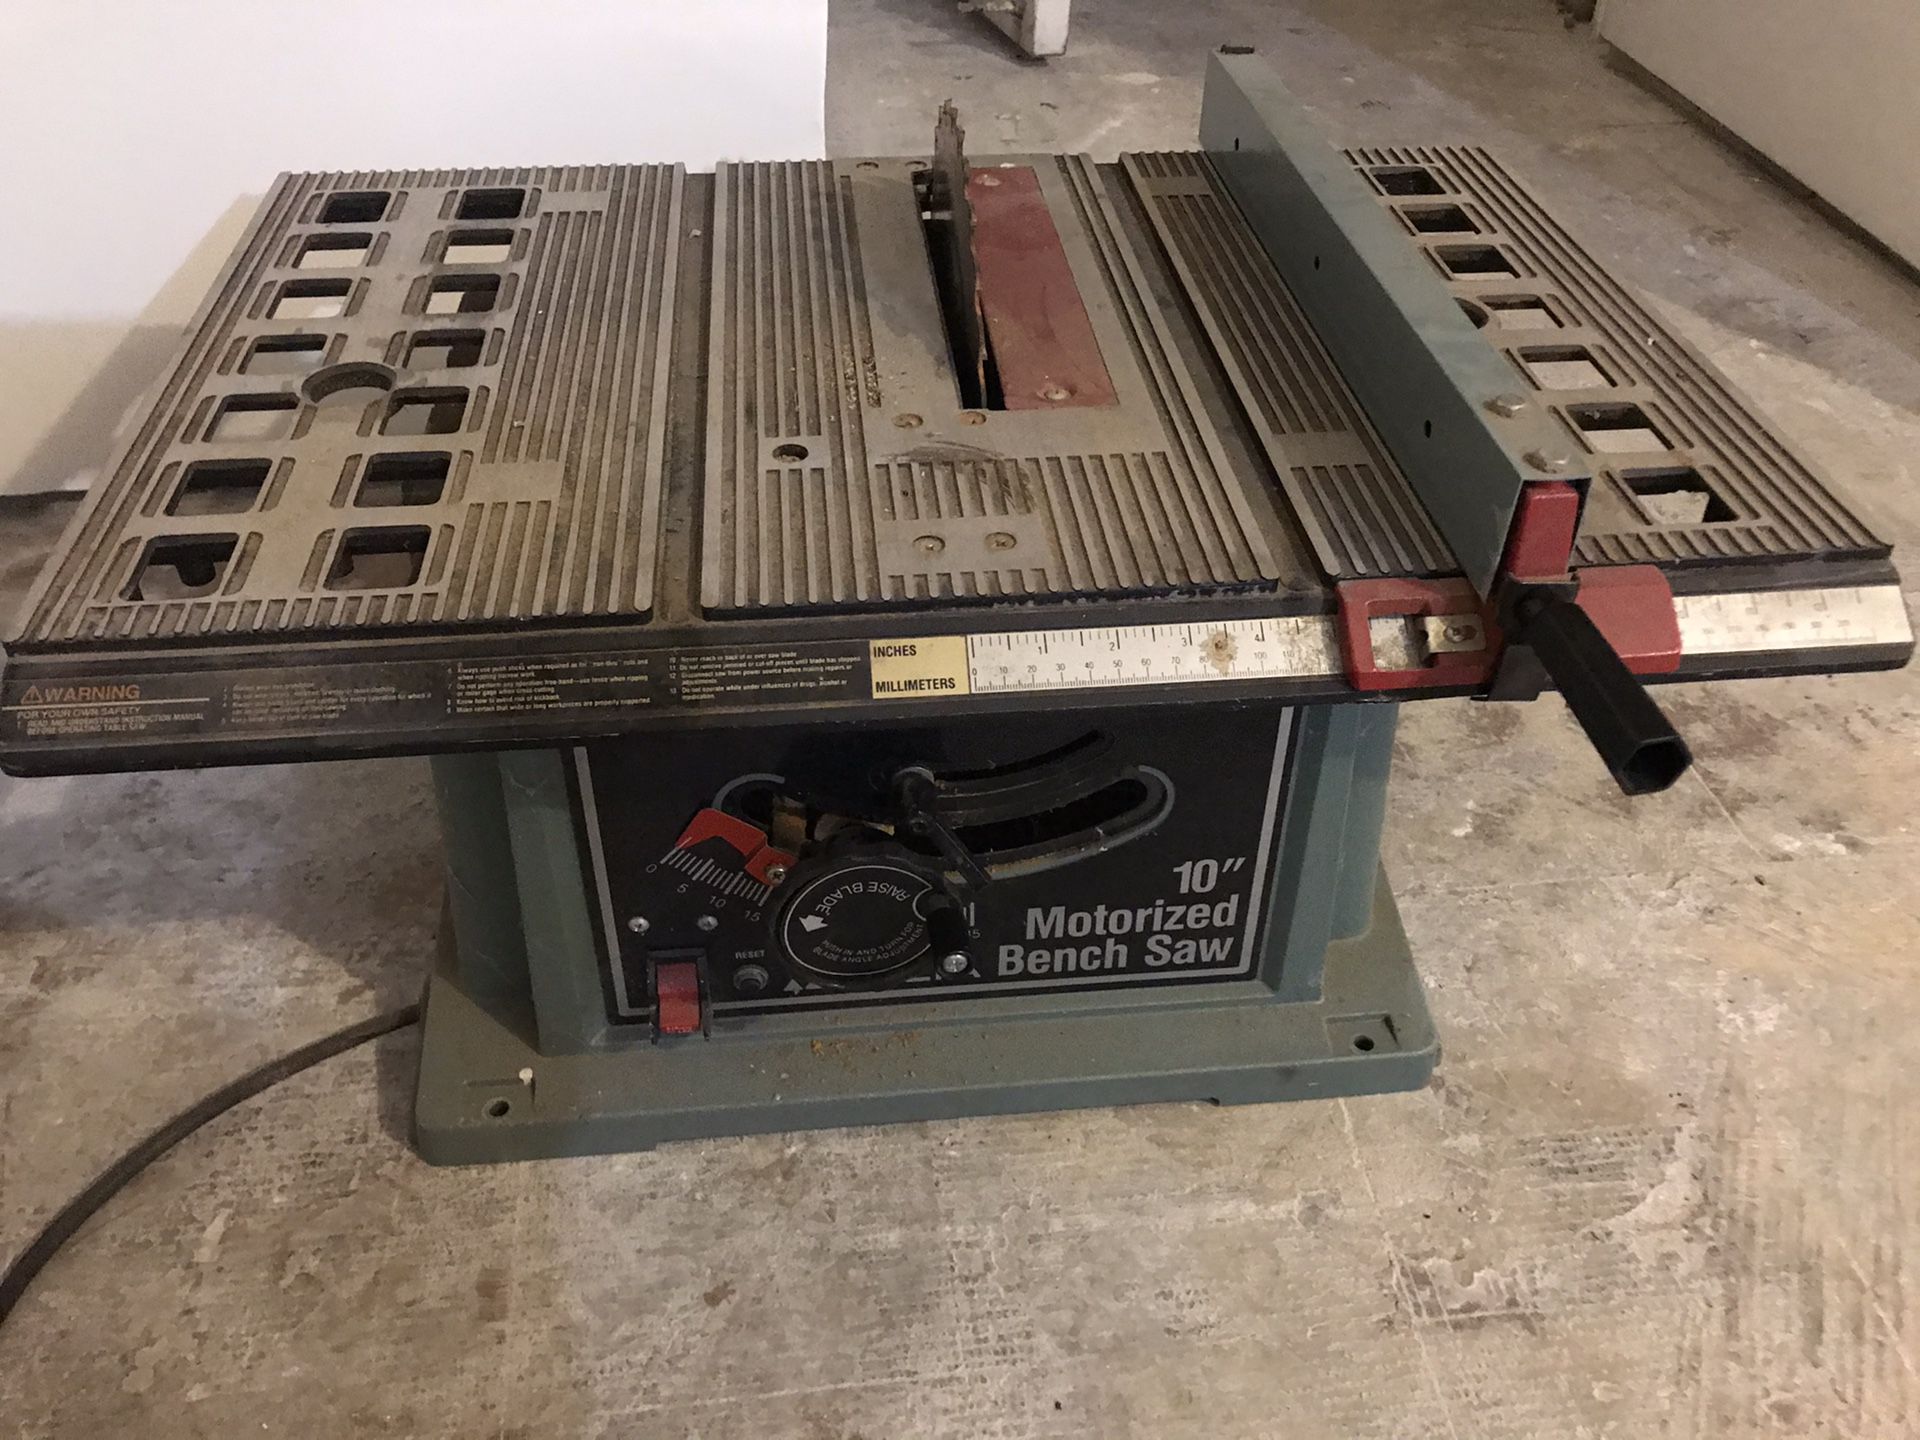 Delta 10” Motorized Table Bench Saw